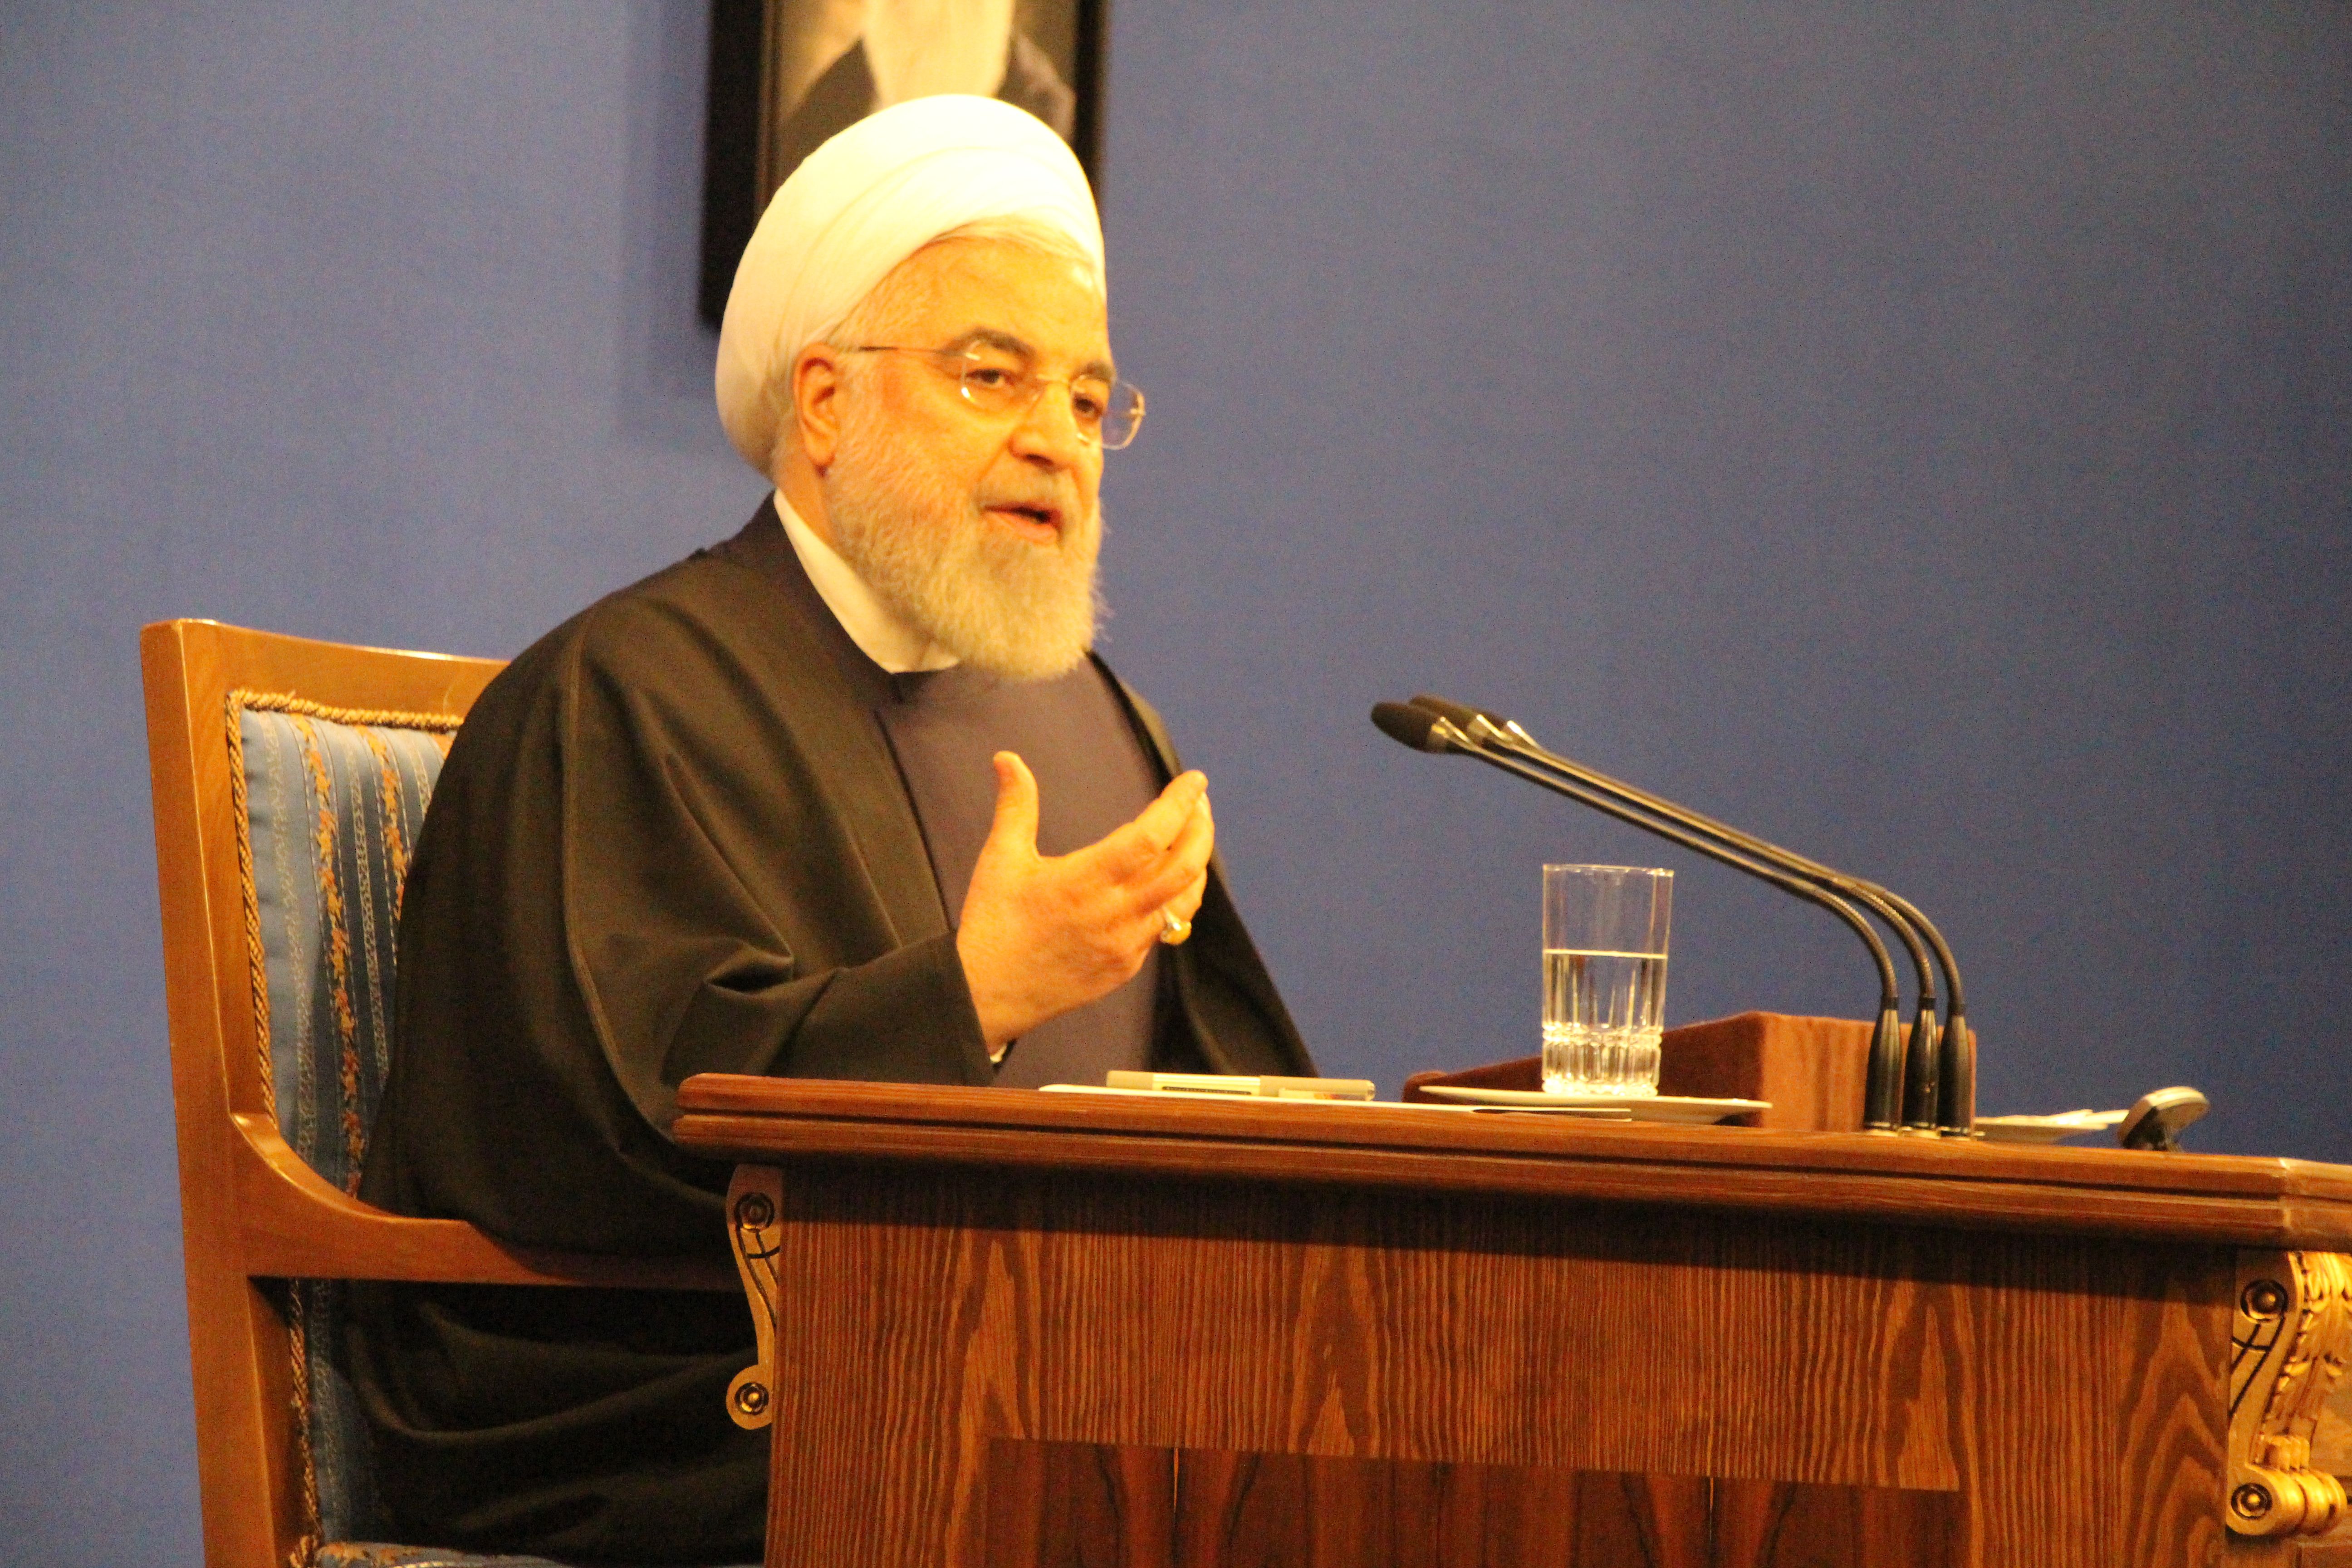 Iran's President Rouhani. Image by Reese Erlich. Iran, 2020.